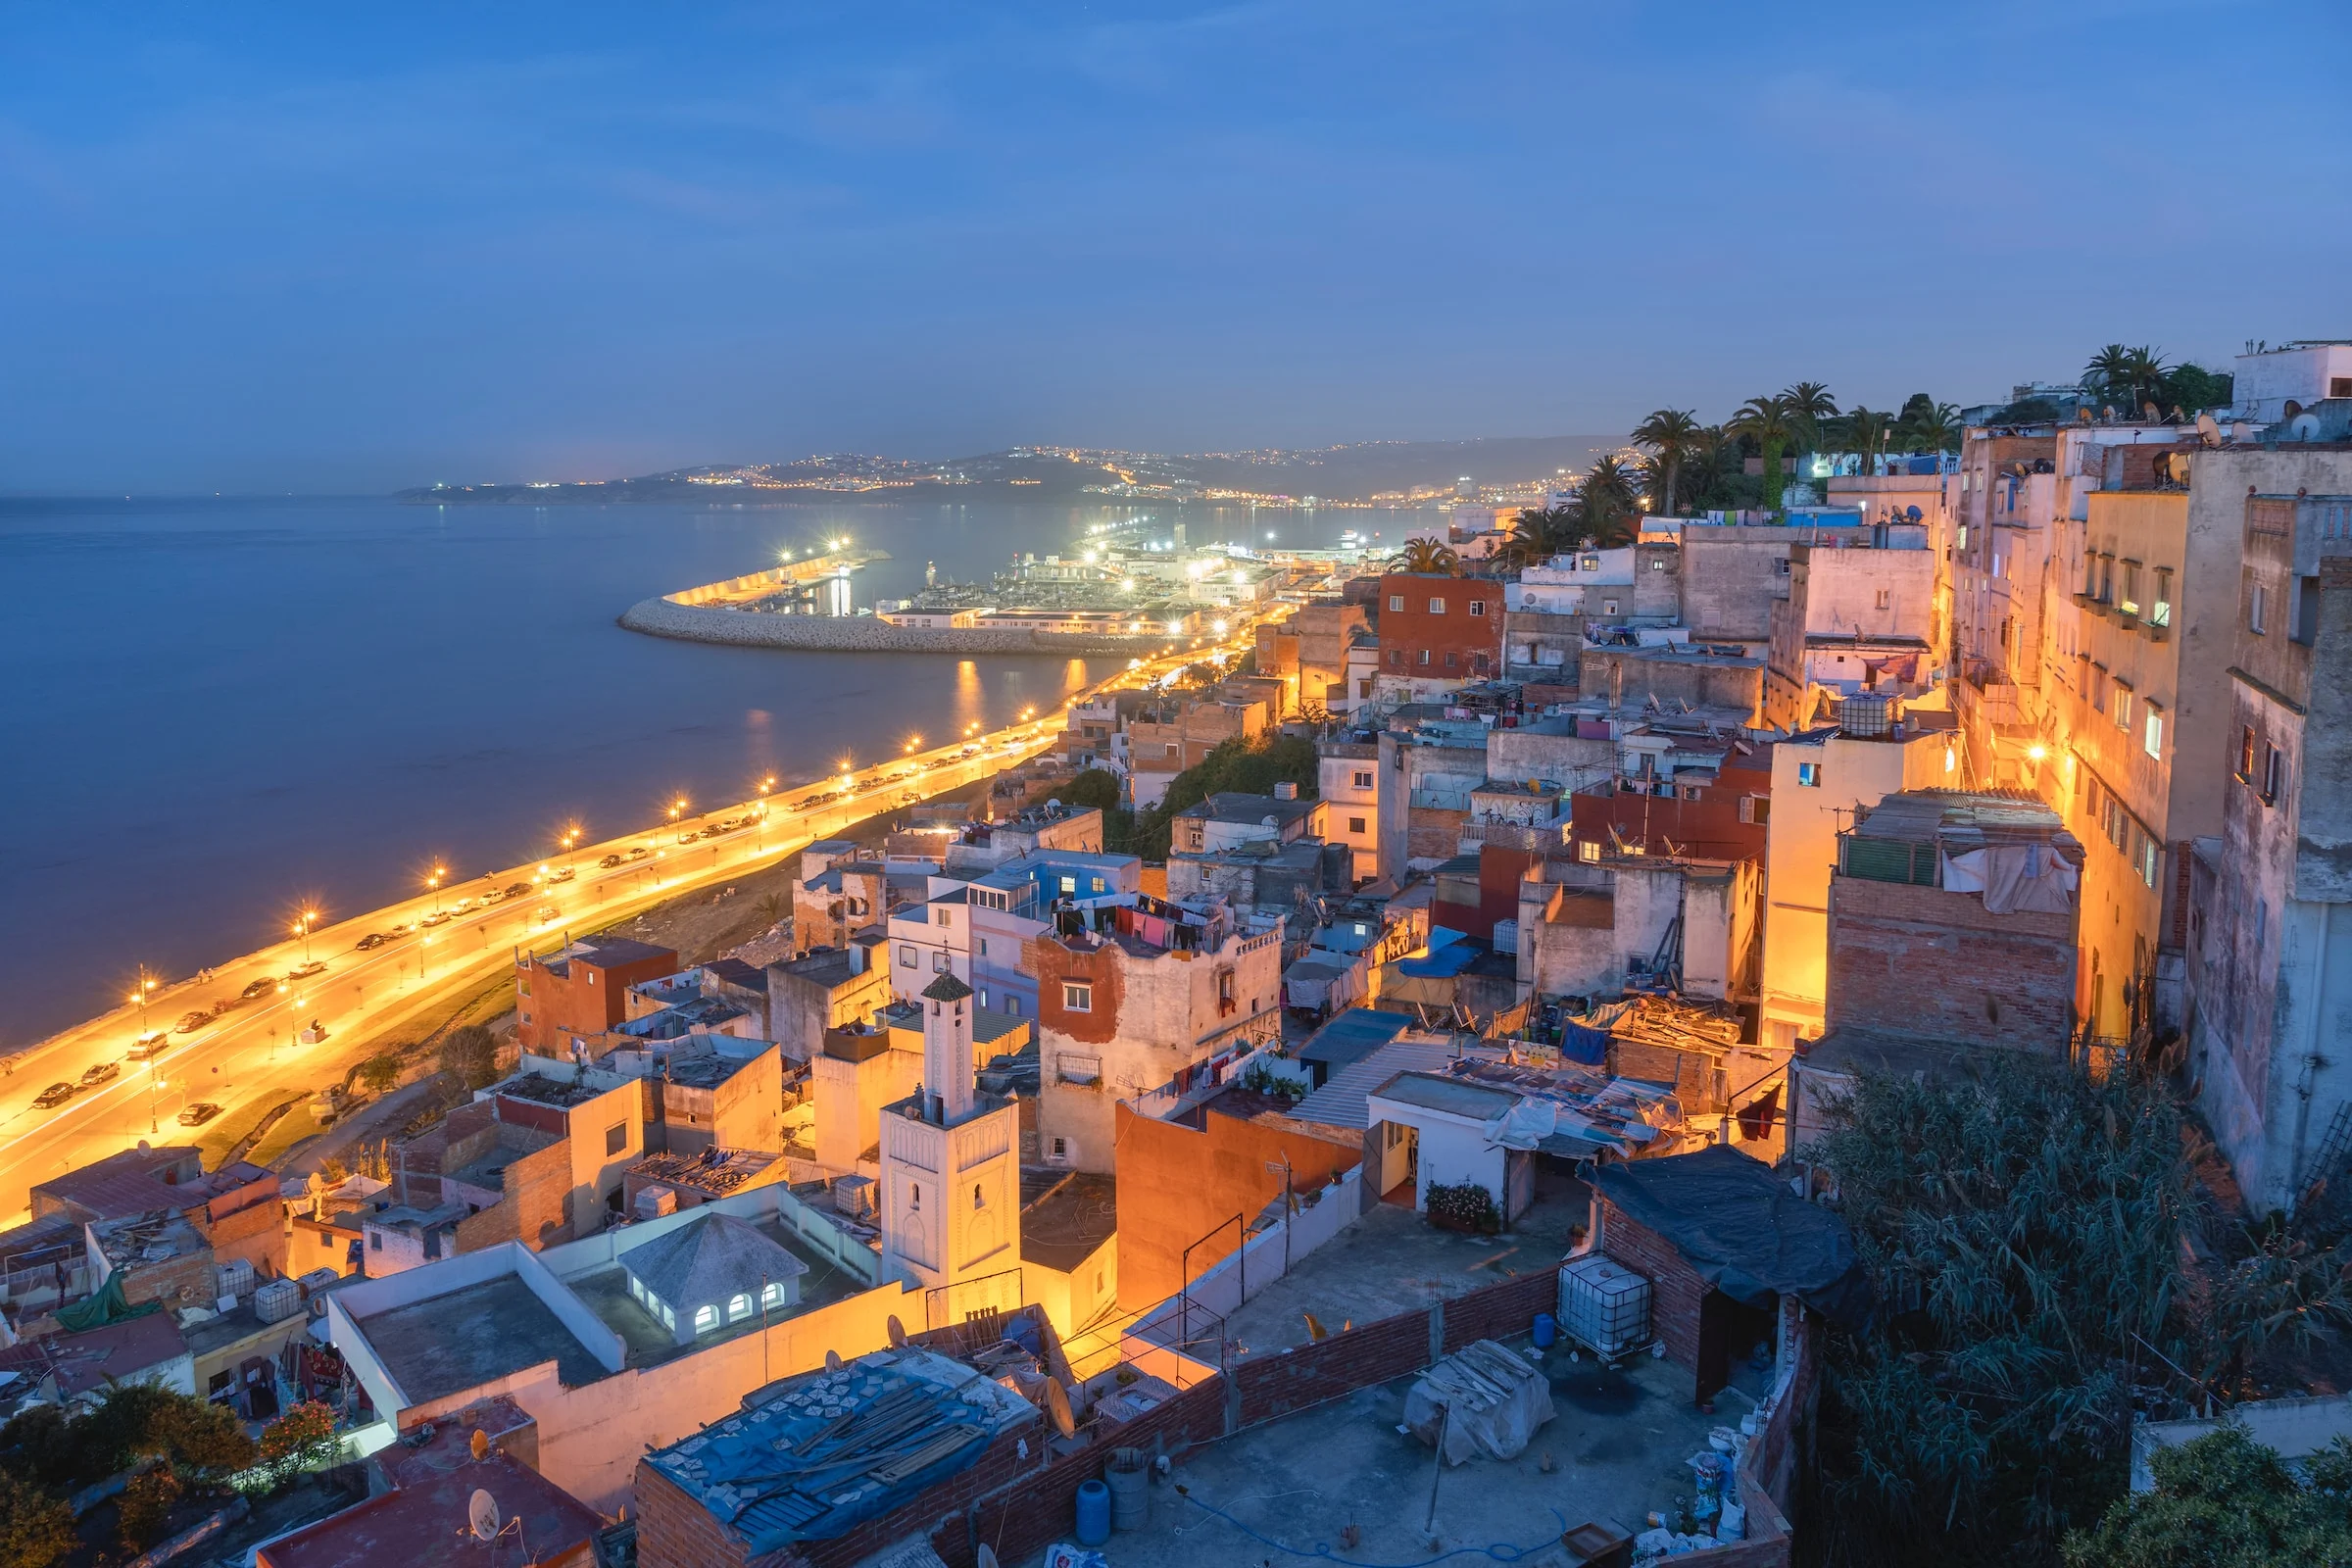 Aerial view of city near body of water during night time in Tangier, Morocco